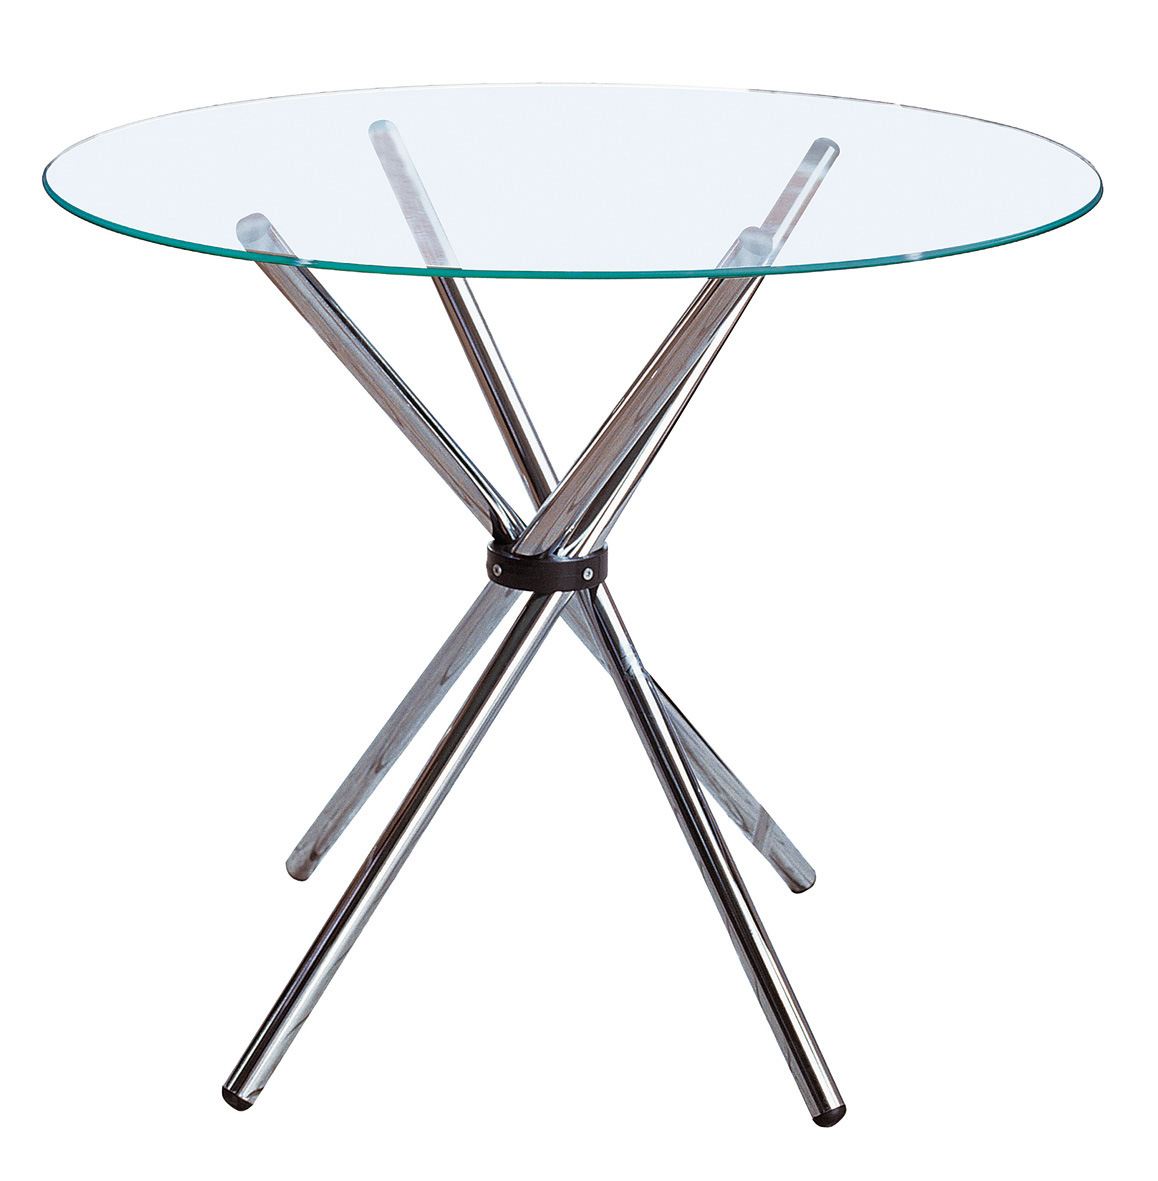 Casa 4 Seat Dining Table